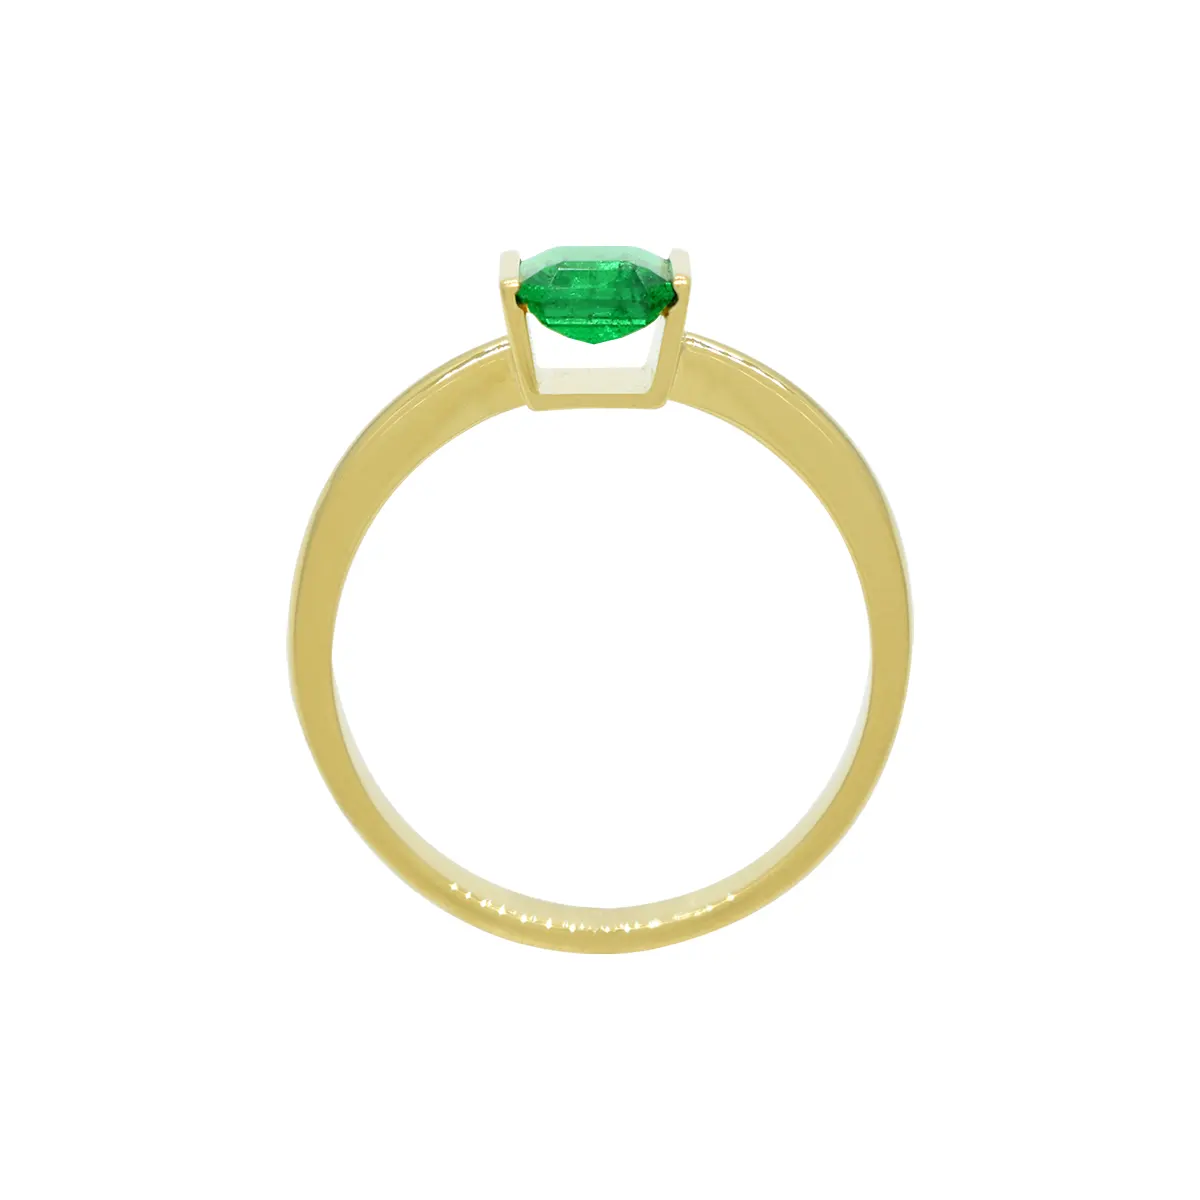 The emerald is set in a half-bezel tension setting. This setting securely holds the emerald in place while allowing a significant portion of the stone to be visible, showcasing its natural beauty and color